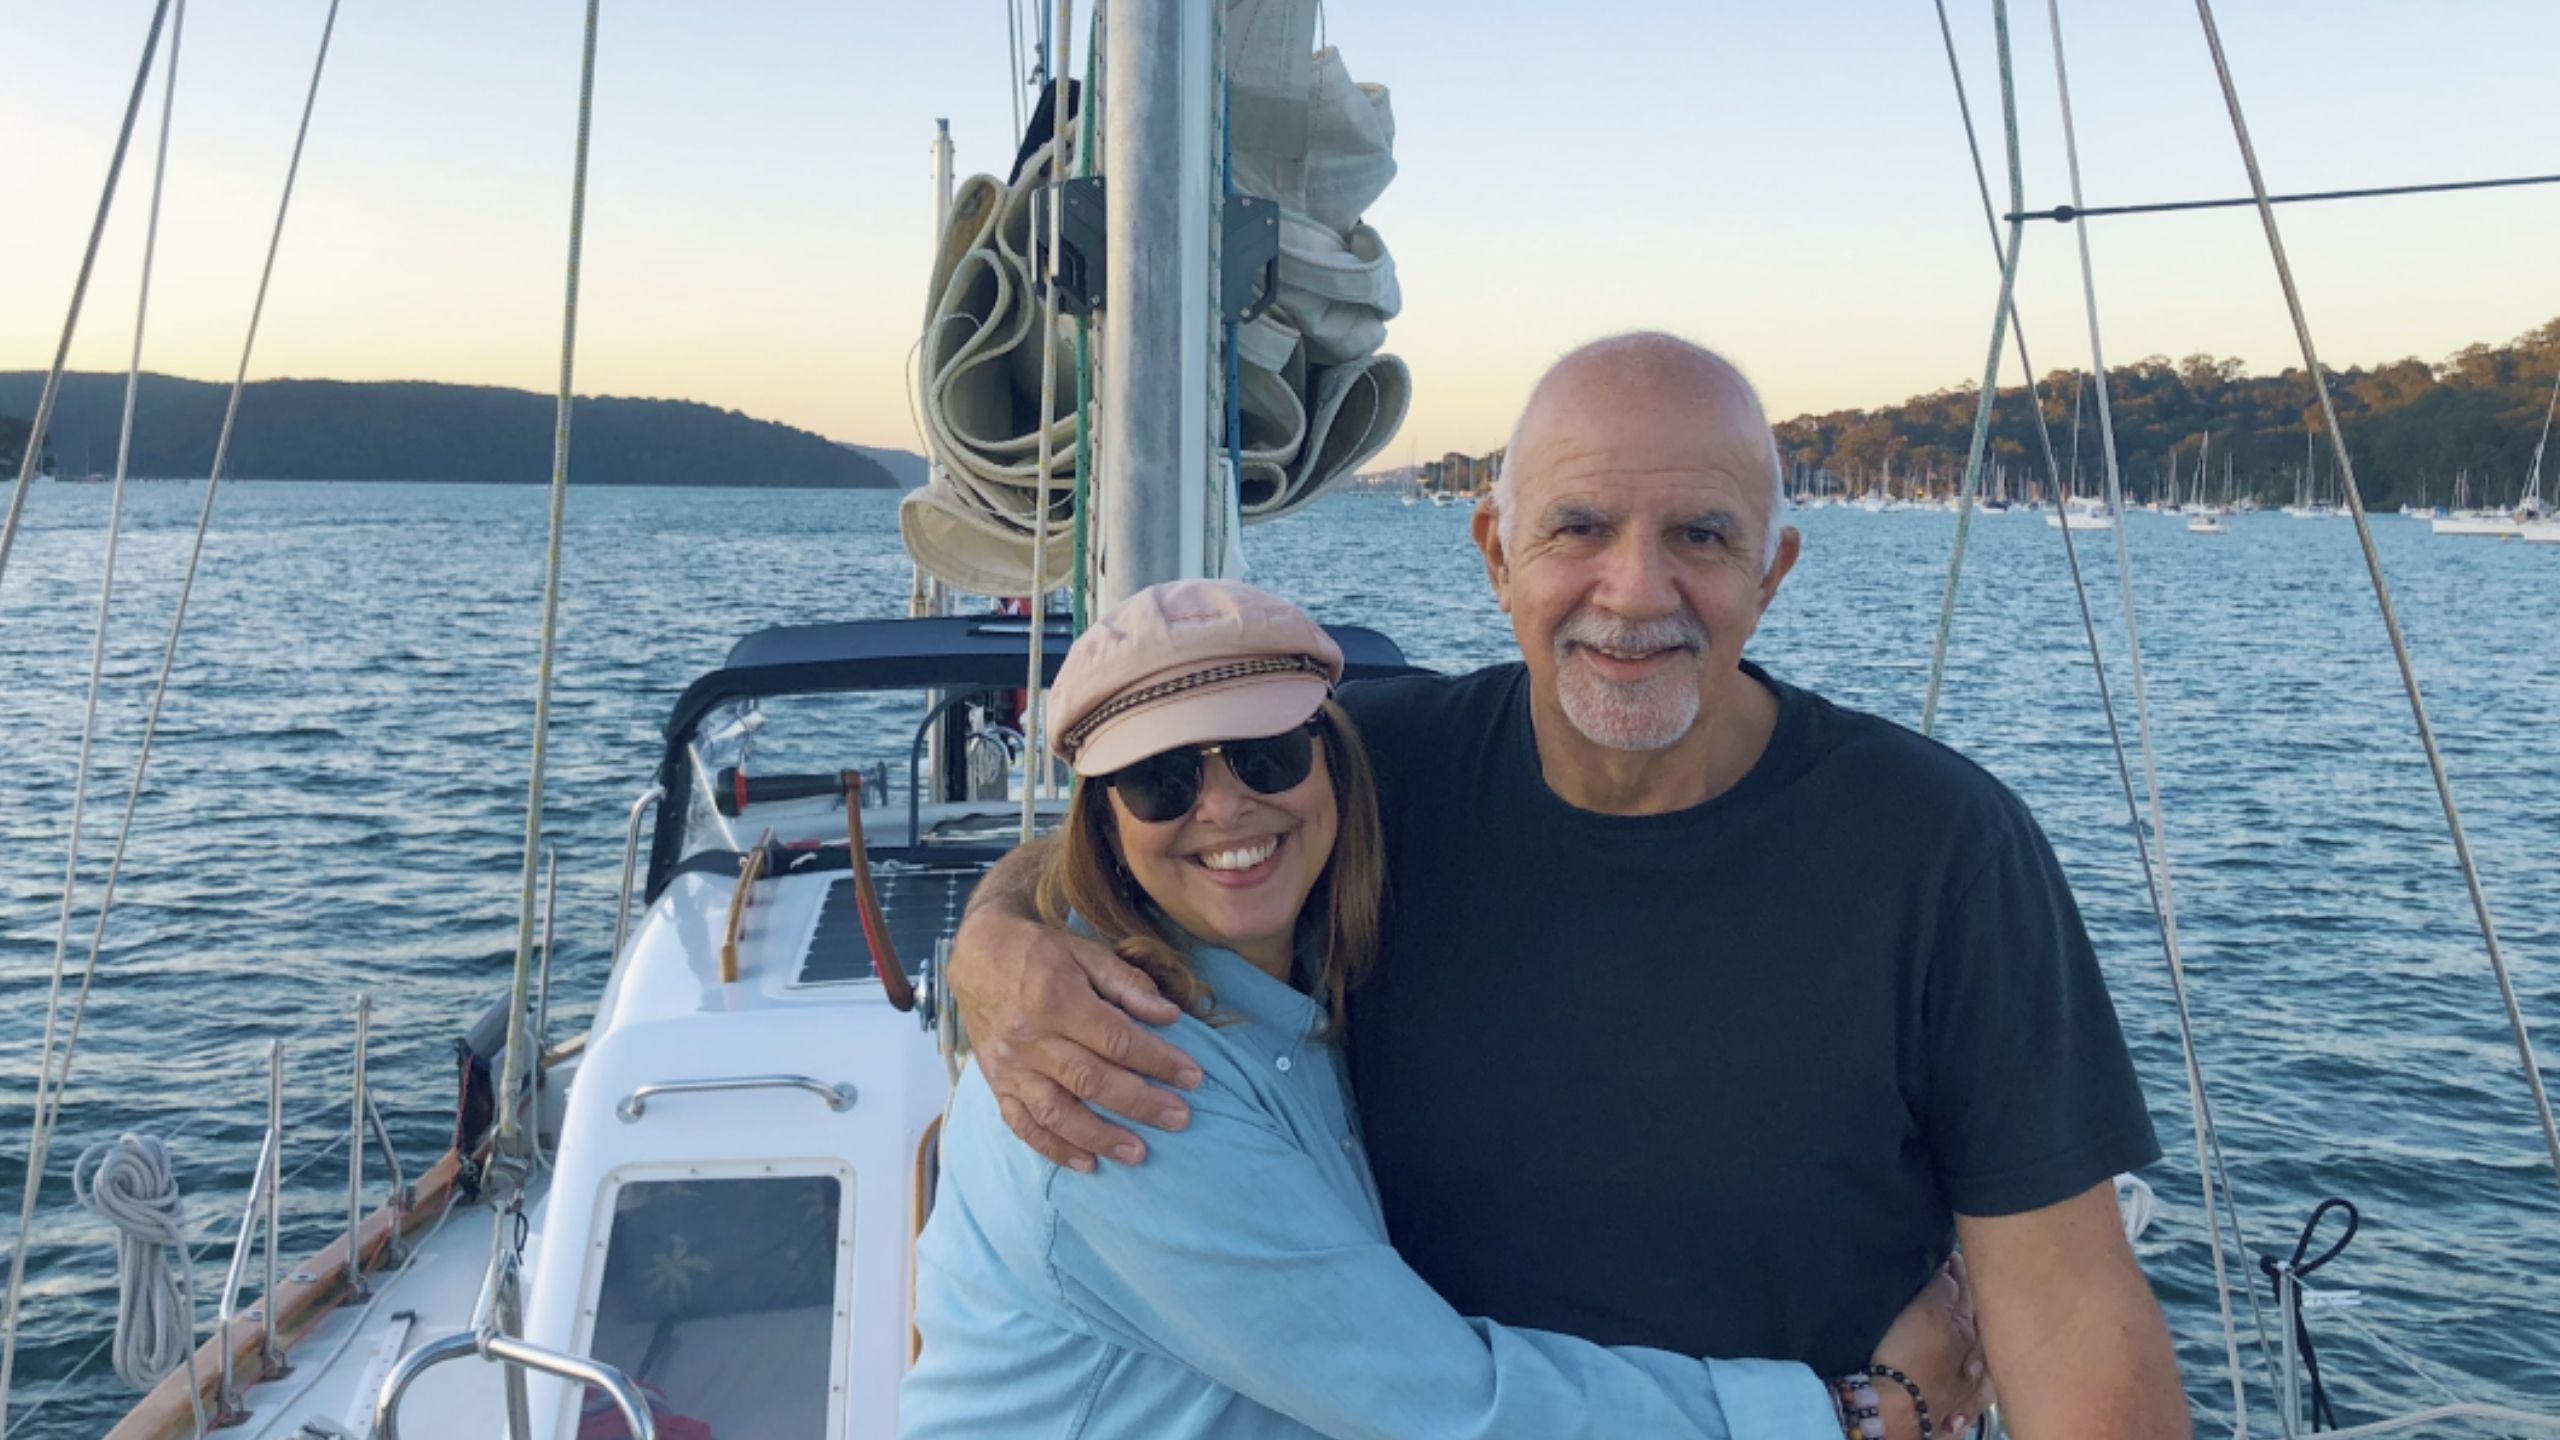 Jim on his boat, with his wife Adriana. (Source: Supplied)